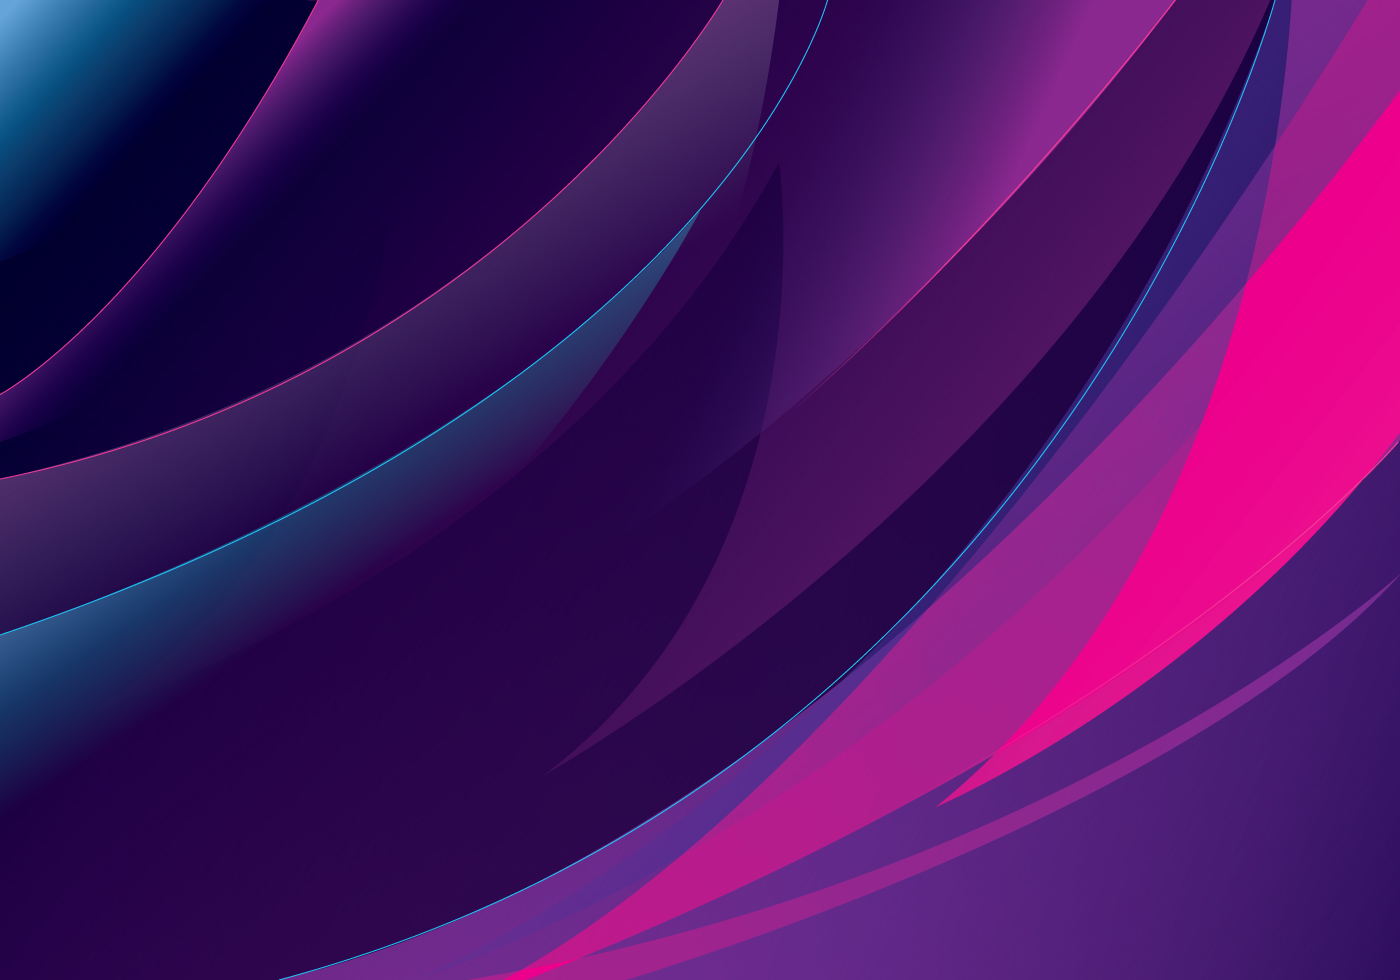 Purple Abstract Vector - Download Free Vector Art, Stock Graphics & Images